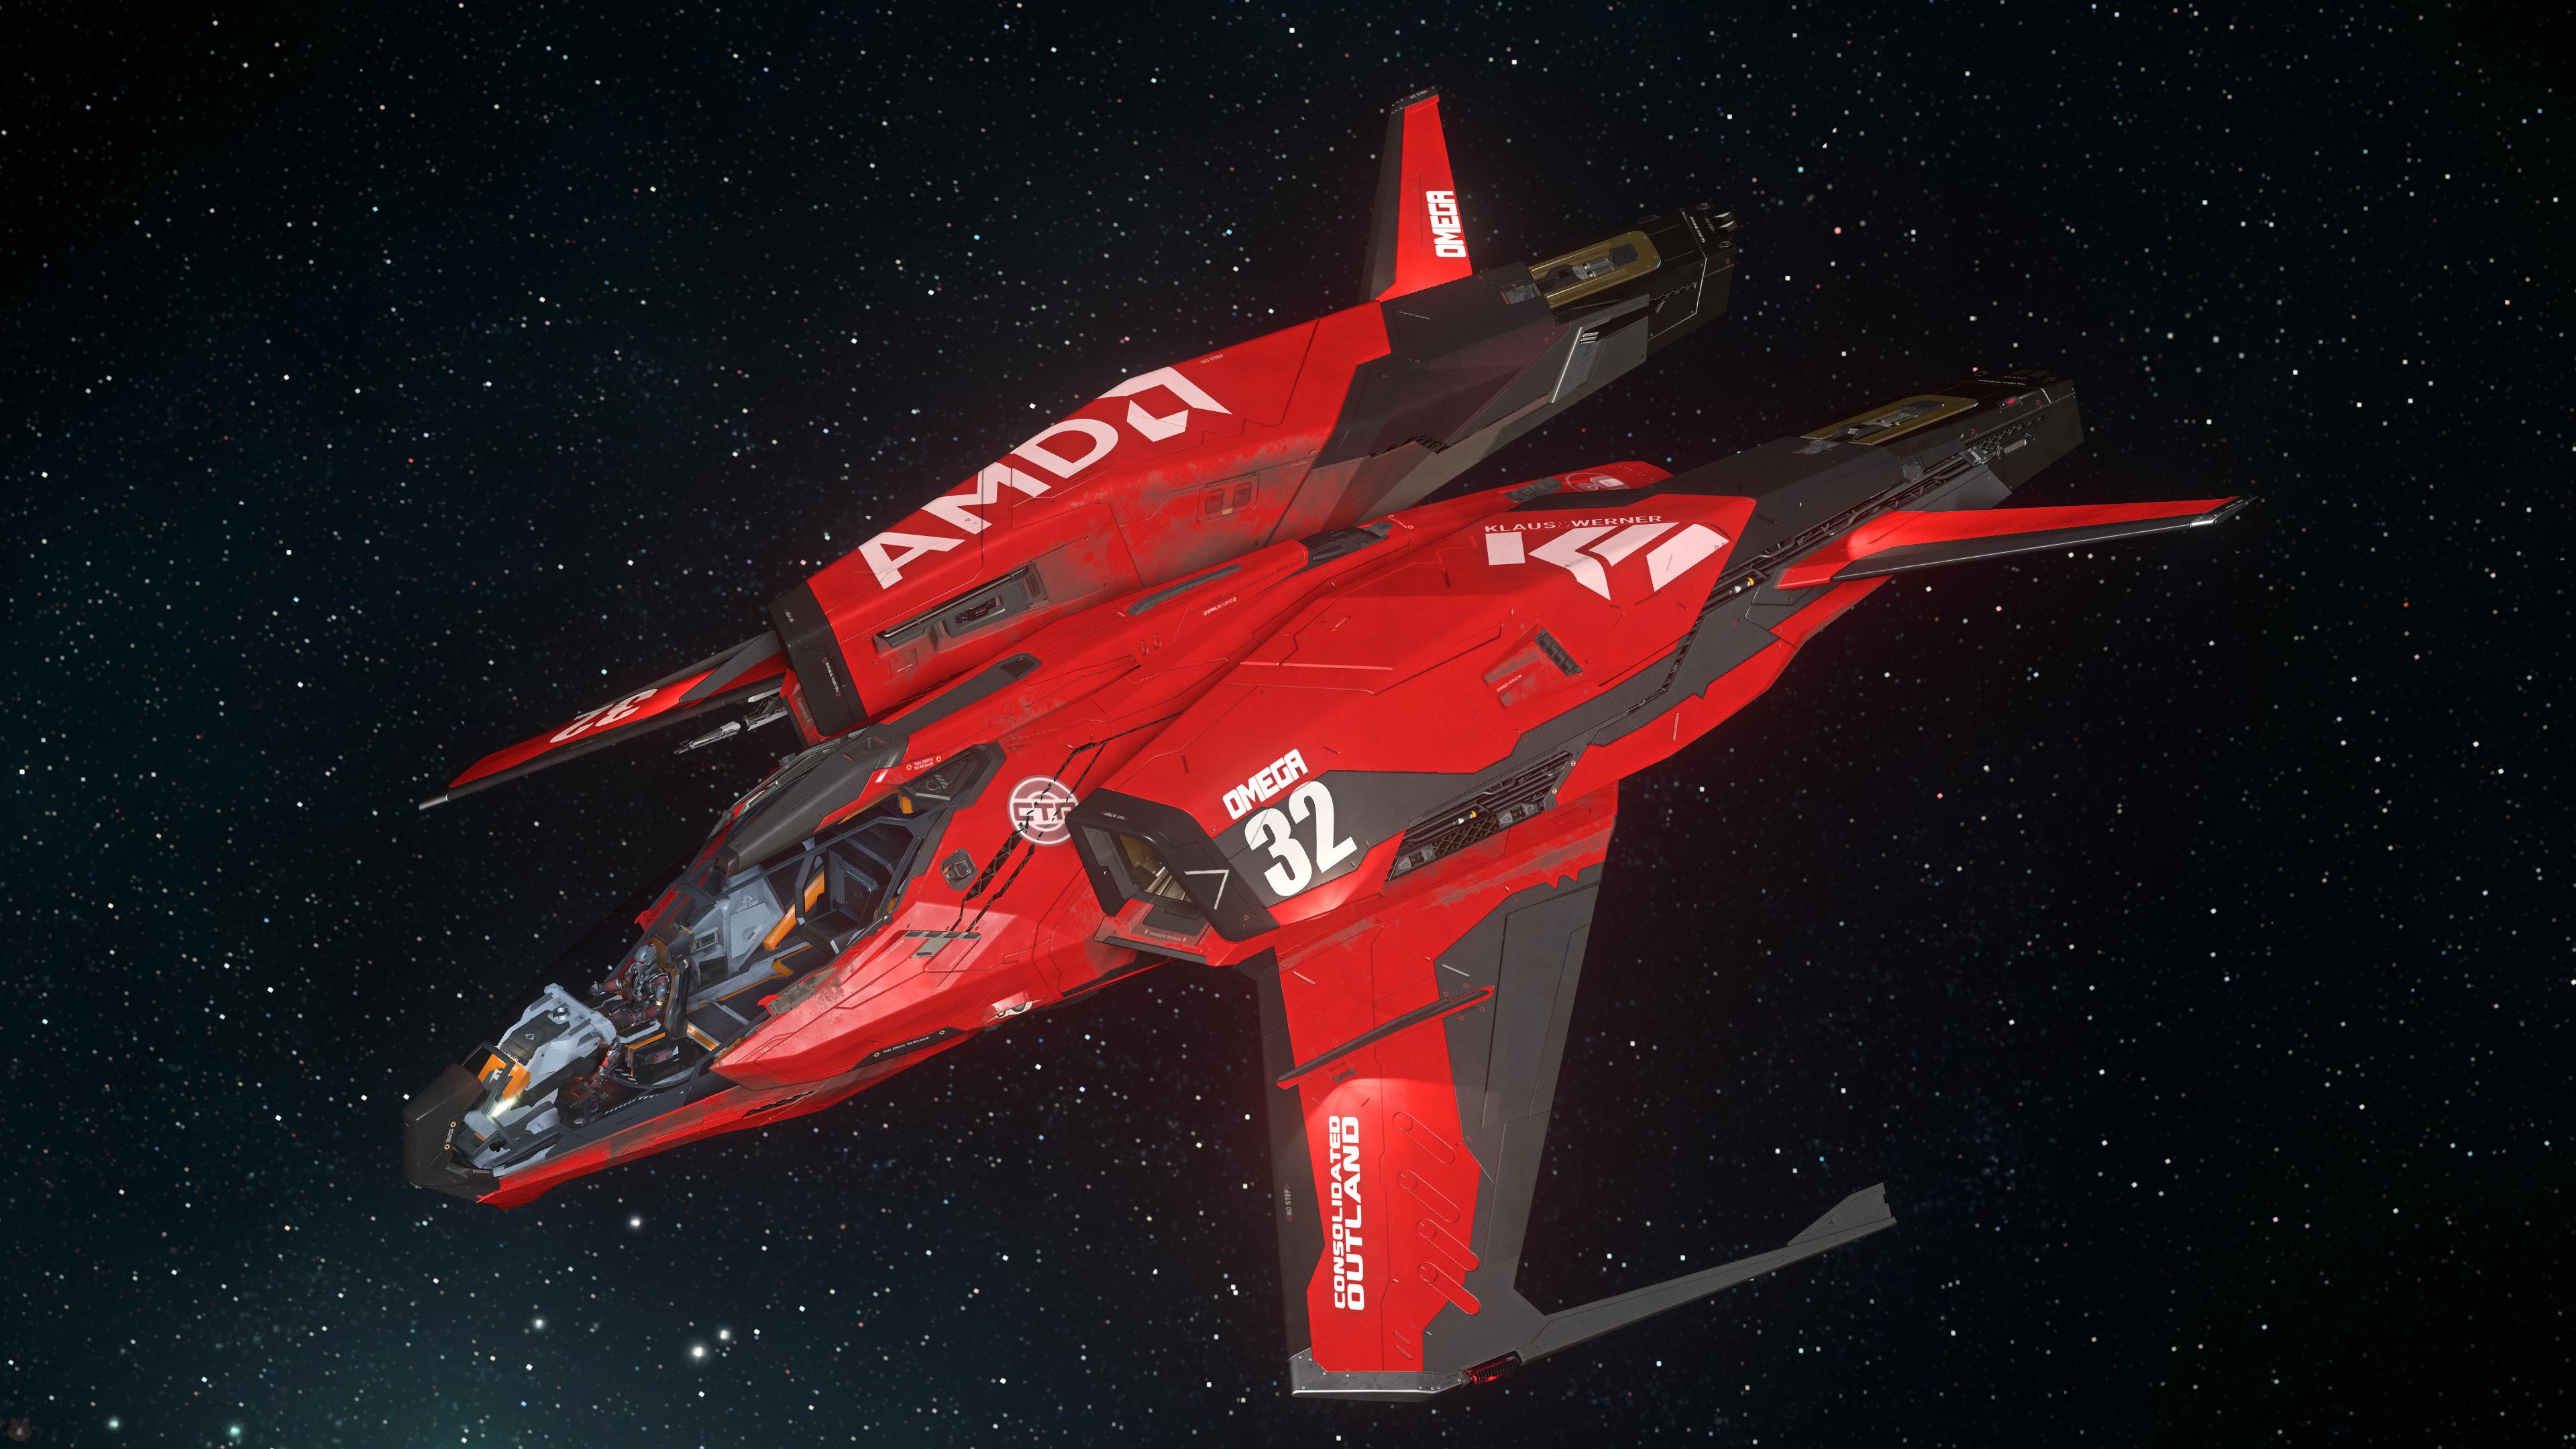 STAR CITIZEN SHIP - MUSTANG OMEGA - GAME PACKAGE AMD NEVER SETTLE SPACE  EDITION